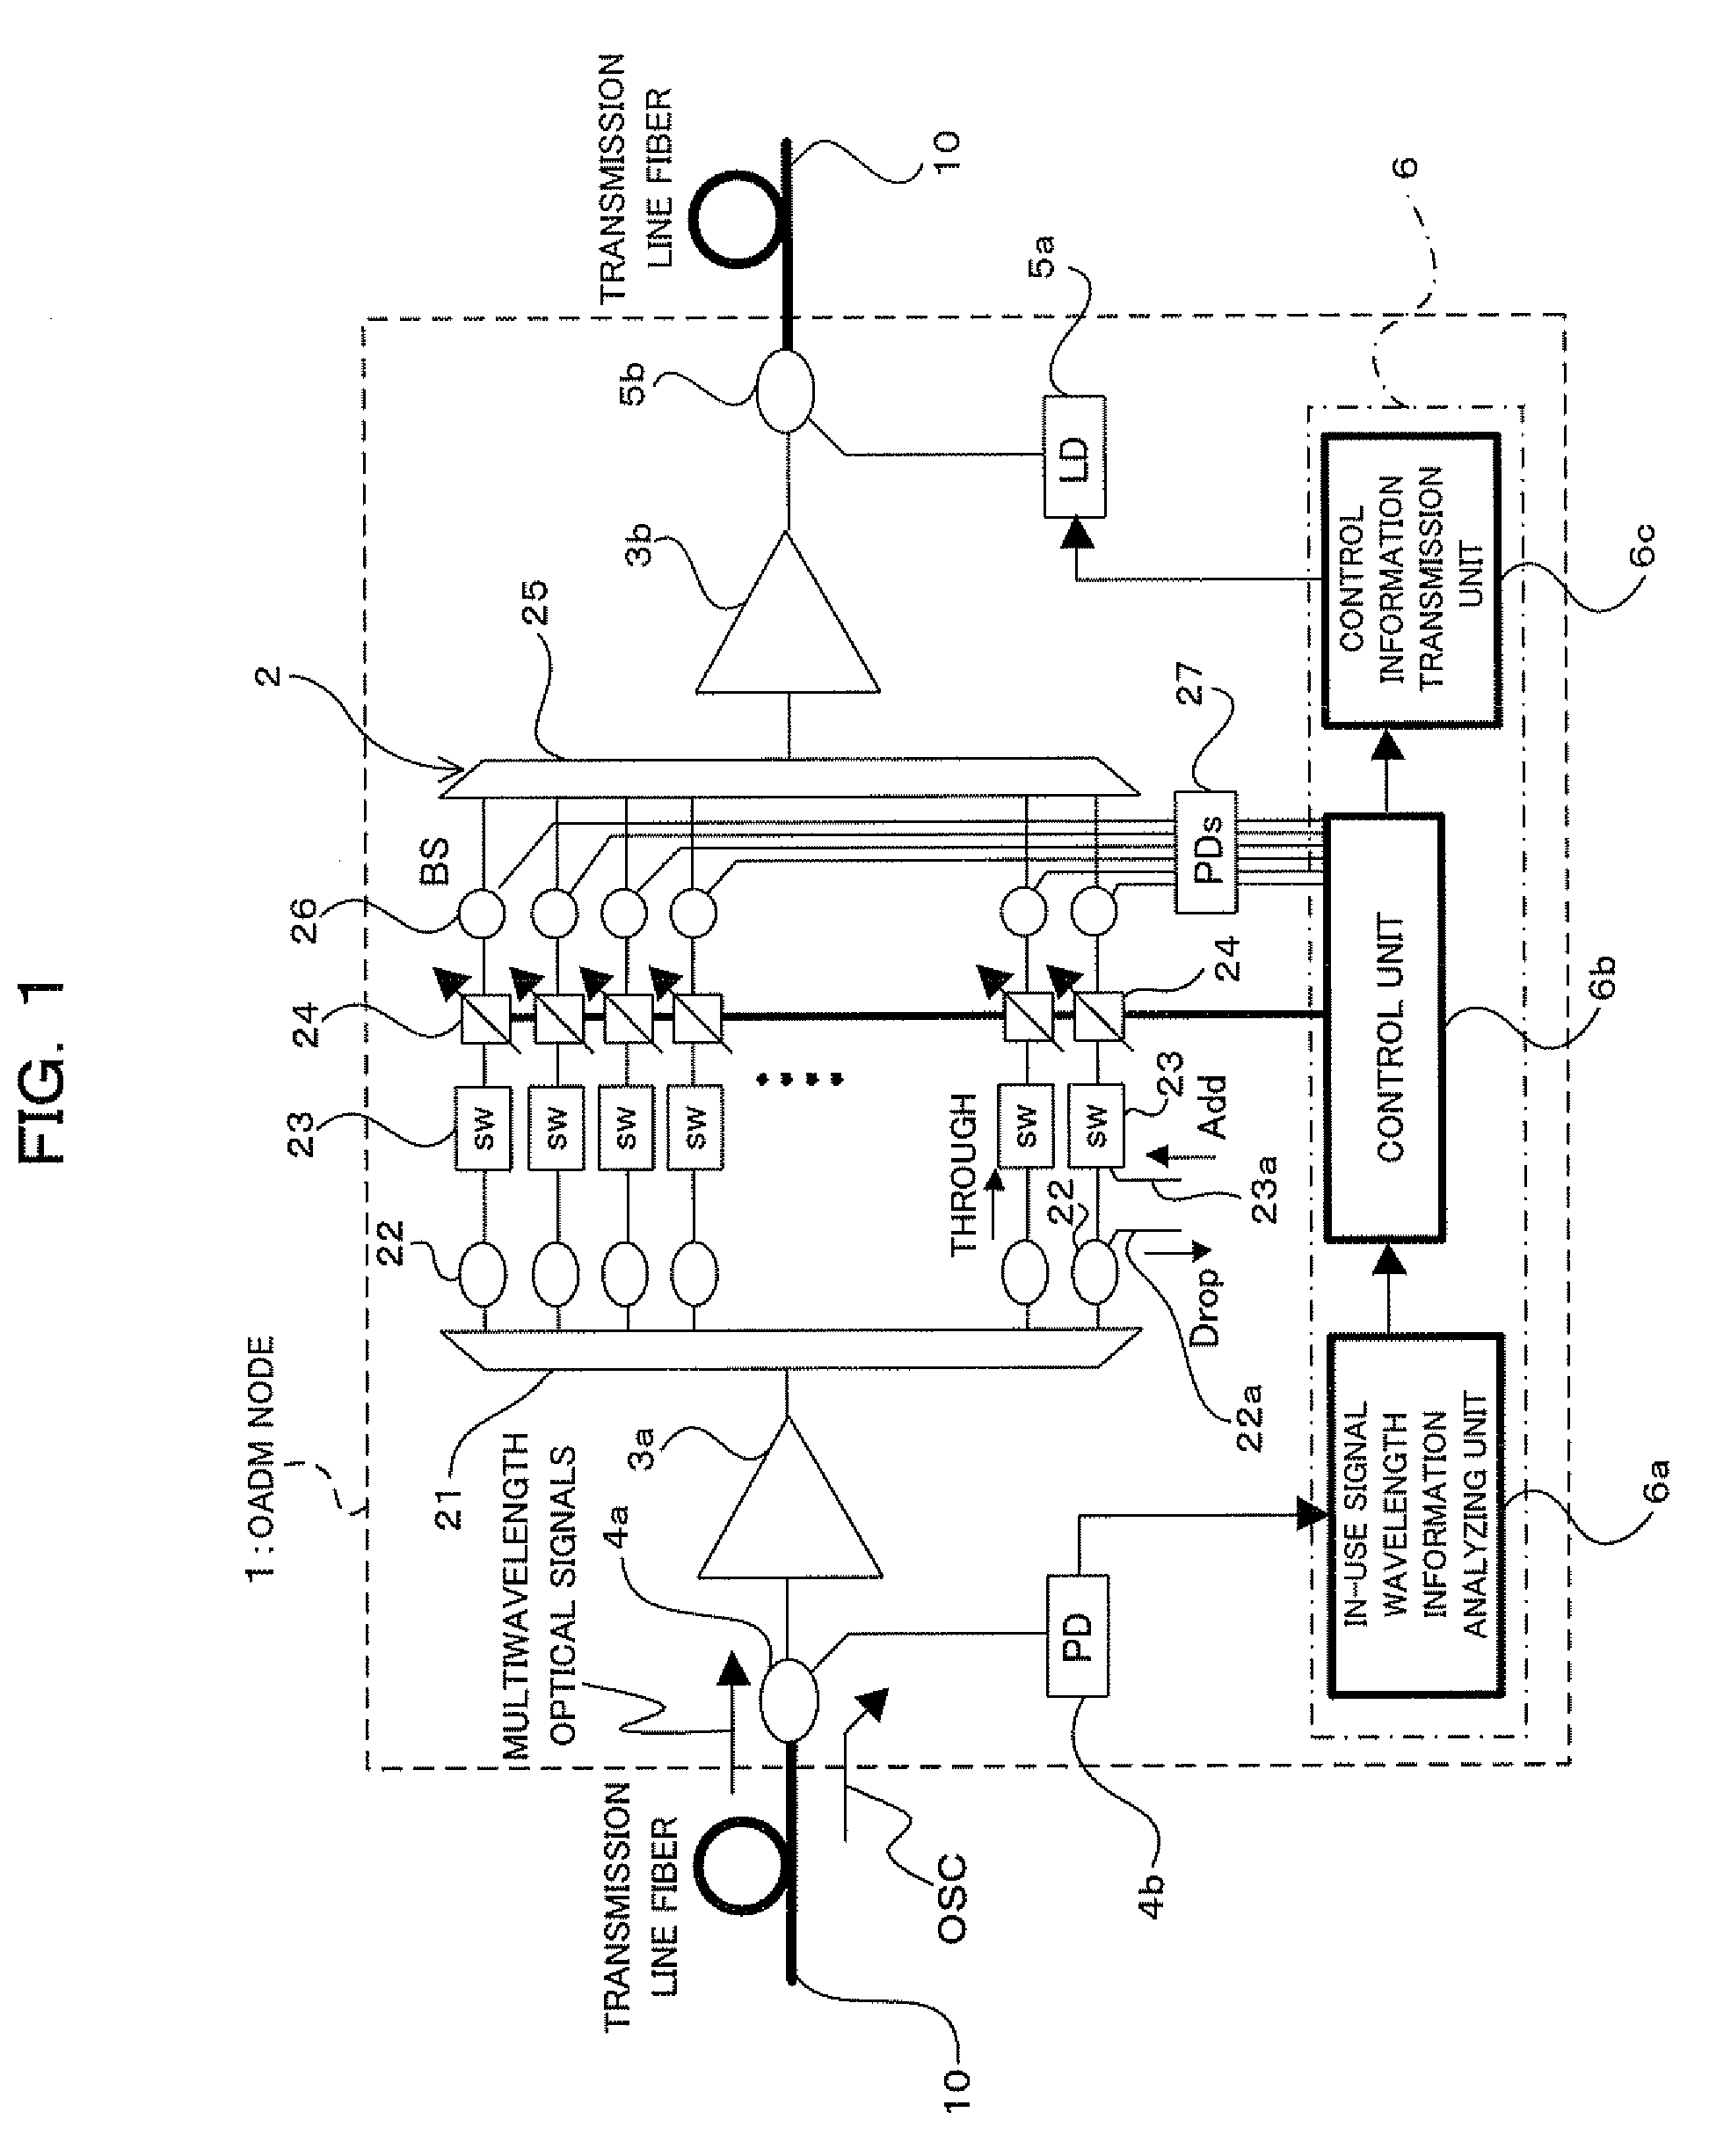 Optical transmission apparatus and method of controlling the same